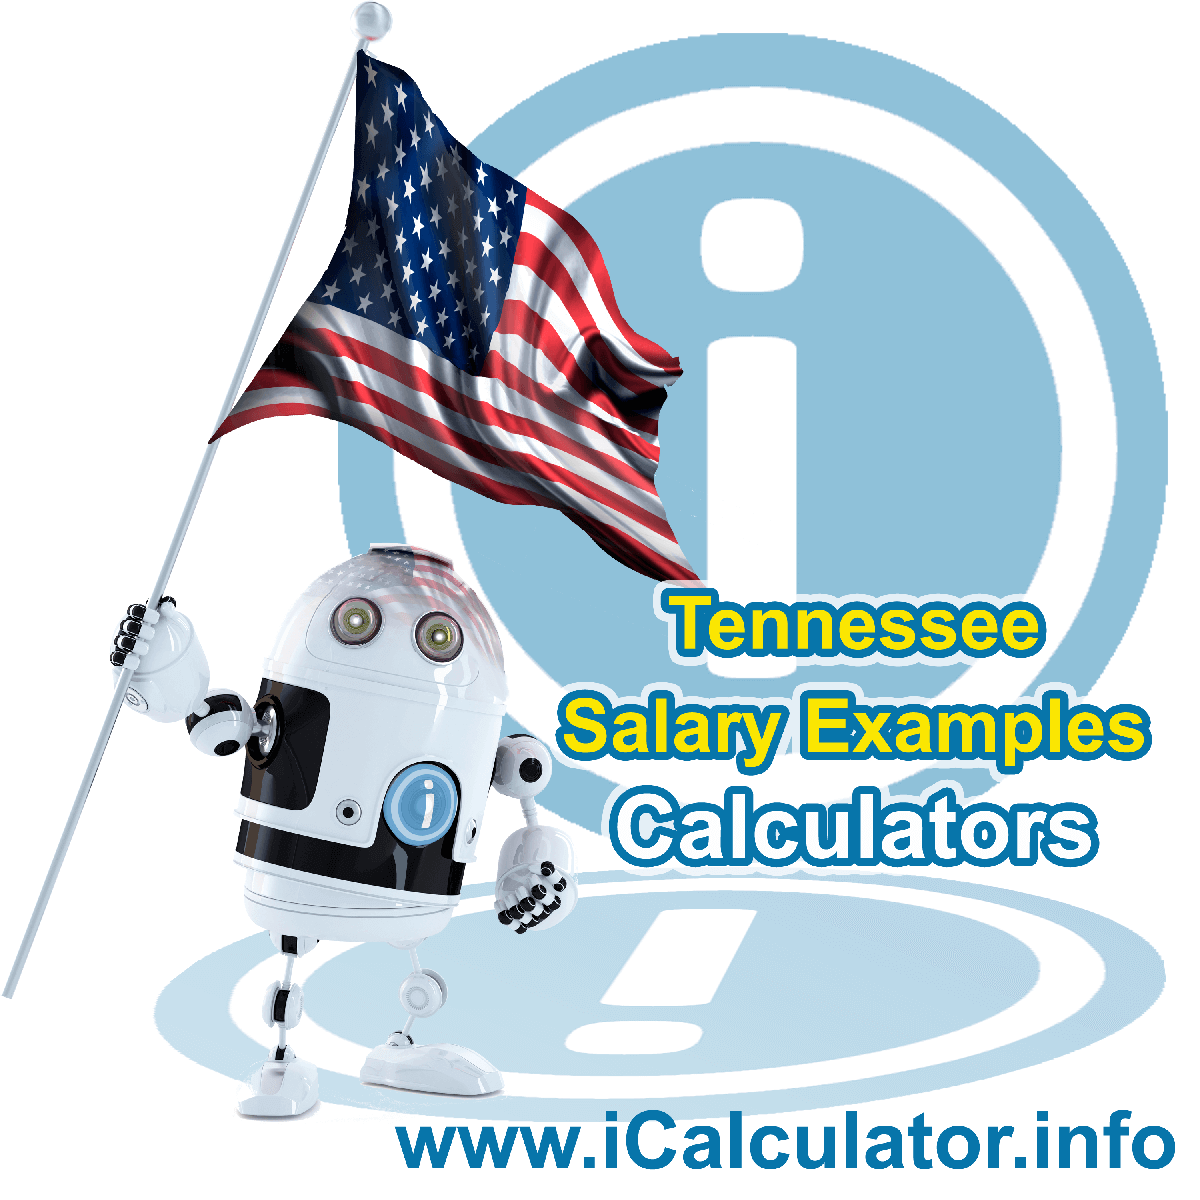 Tennessee Salary Example for $130,000.00 in 2022 | iCalculator™ | $130,000.00 salary example for employee and employer paying Tennessee State tincome taxes. Detailed salary after tax calculation including Tennessee State Tax, Federal State Tax, Medicare Deductions, Social Security, Capital Gains and other income tax and salary deductions complete with supporting Tennessee state tax tables 